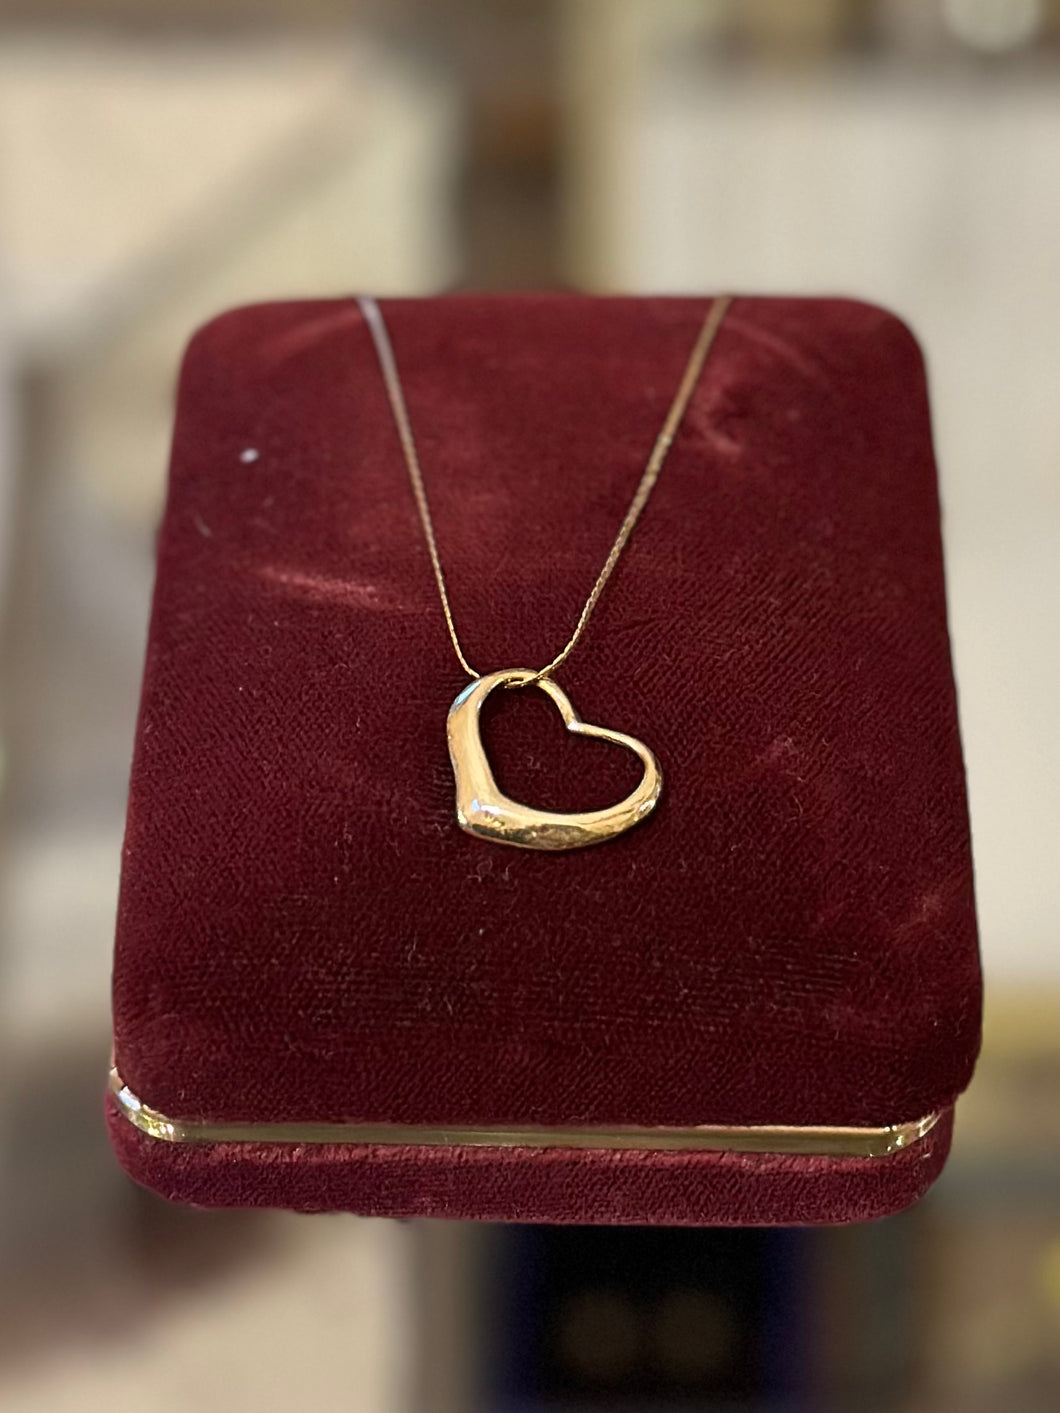 Vintage 1980s 1990s 14k Yellow Gold Open Heart Pendant Necklace Dainty Chain